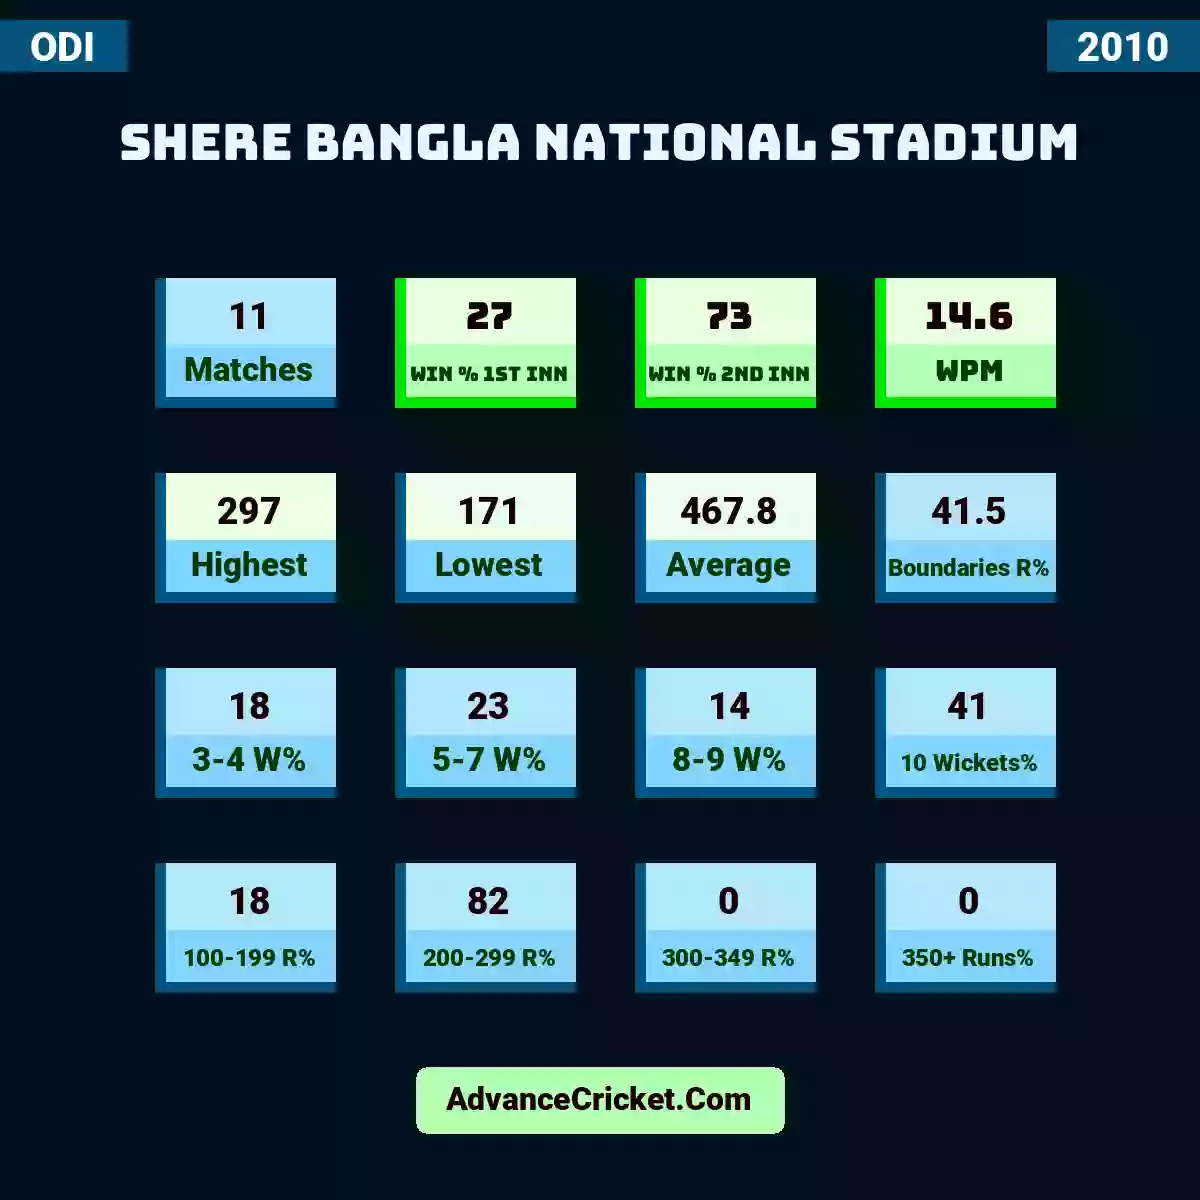 Image showing Shere Bangla National Stadium with Matches: 11, Win % 1st Inn: 27, Win % 2nd Inn: 73, WPM: 14.6, Highest: 297, Lowest: 171, Average: 467.8, Boundaries R%: 41.5, 3-4 W%: 18, 5-7 W%: 23, 8-9 W%: 14, 10 Wickets%: 41, 100-199 R%: 18, 200-299 R%: 82, 300-349 R%: 0, 350+ Runs%: 0.